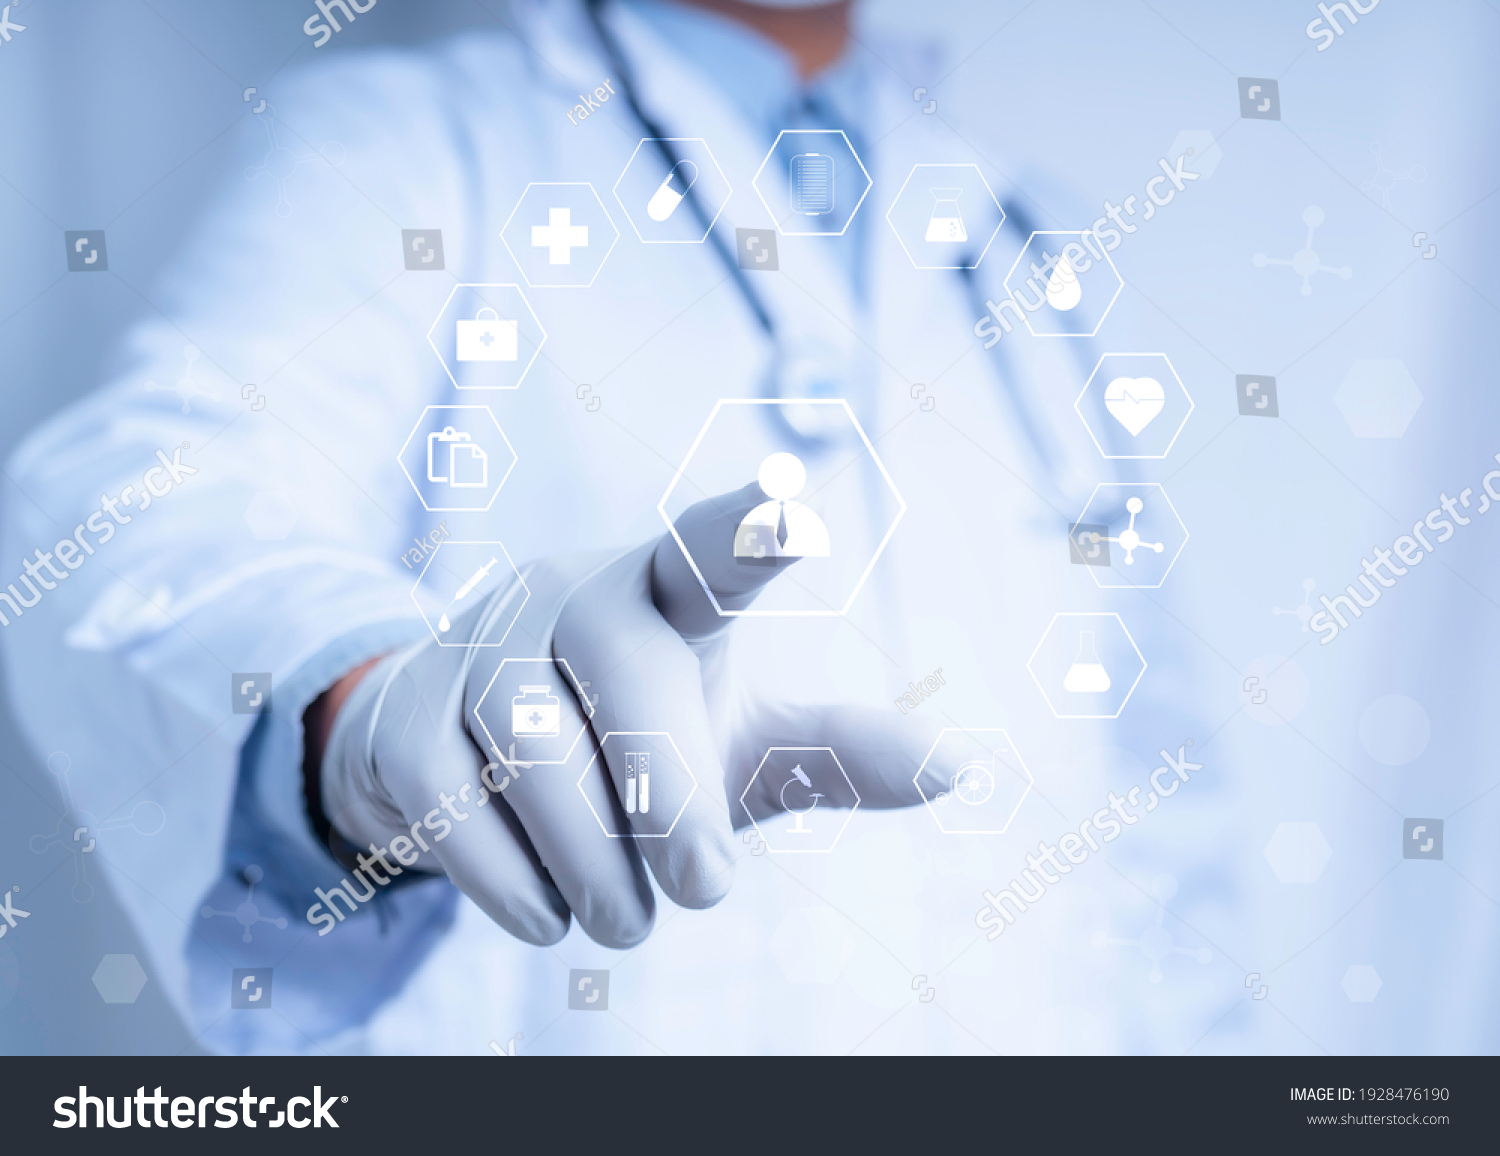 
Doctor touch virtual screen with white icon medical on white background, medical technology network concept #1928476190